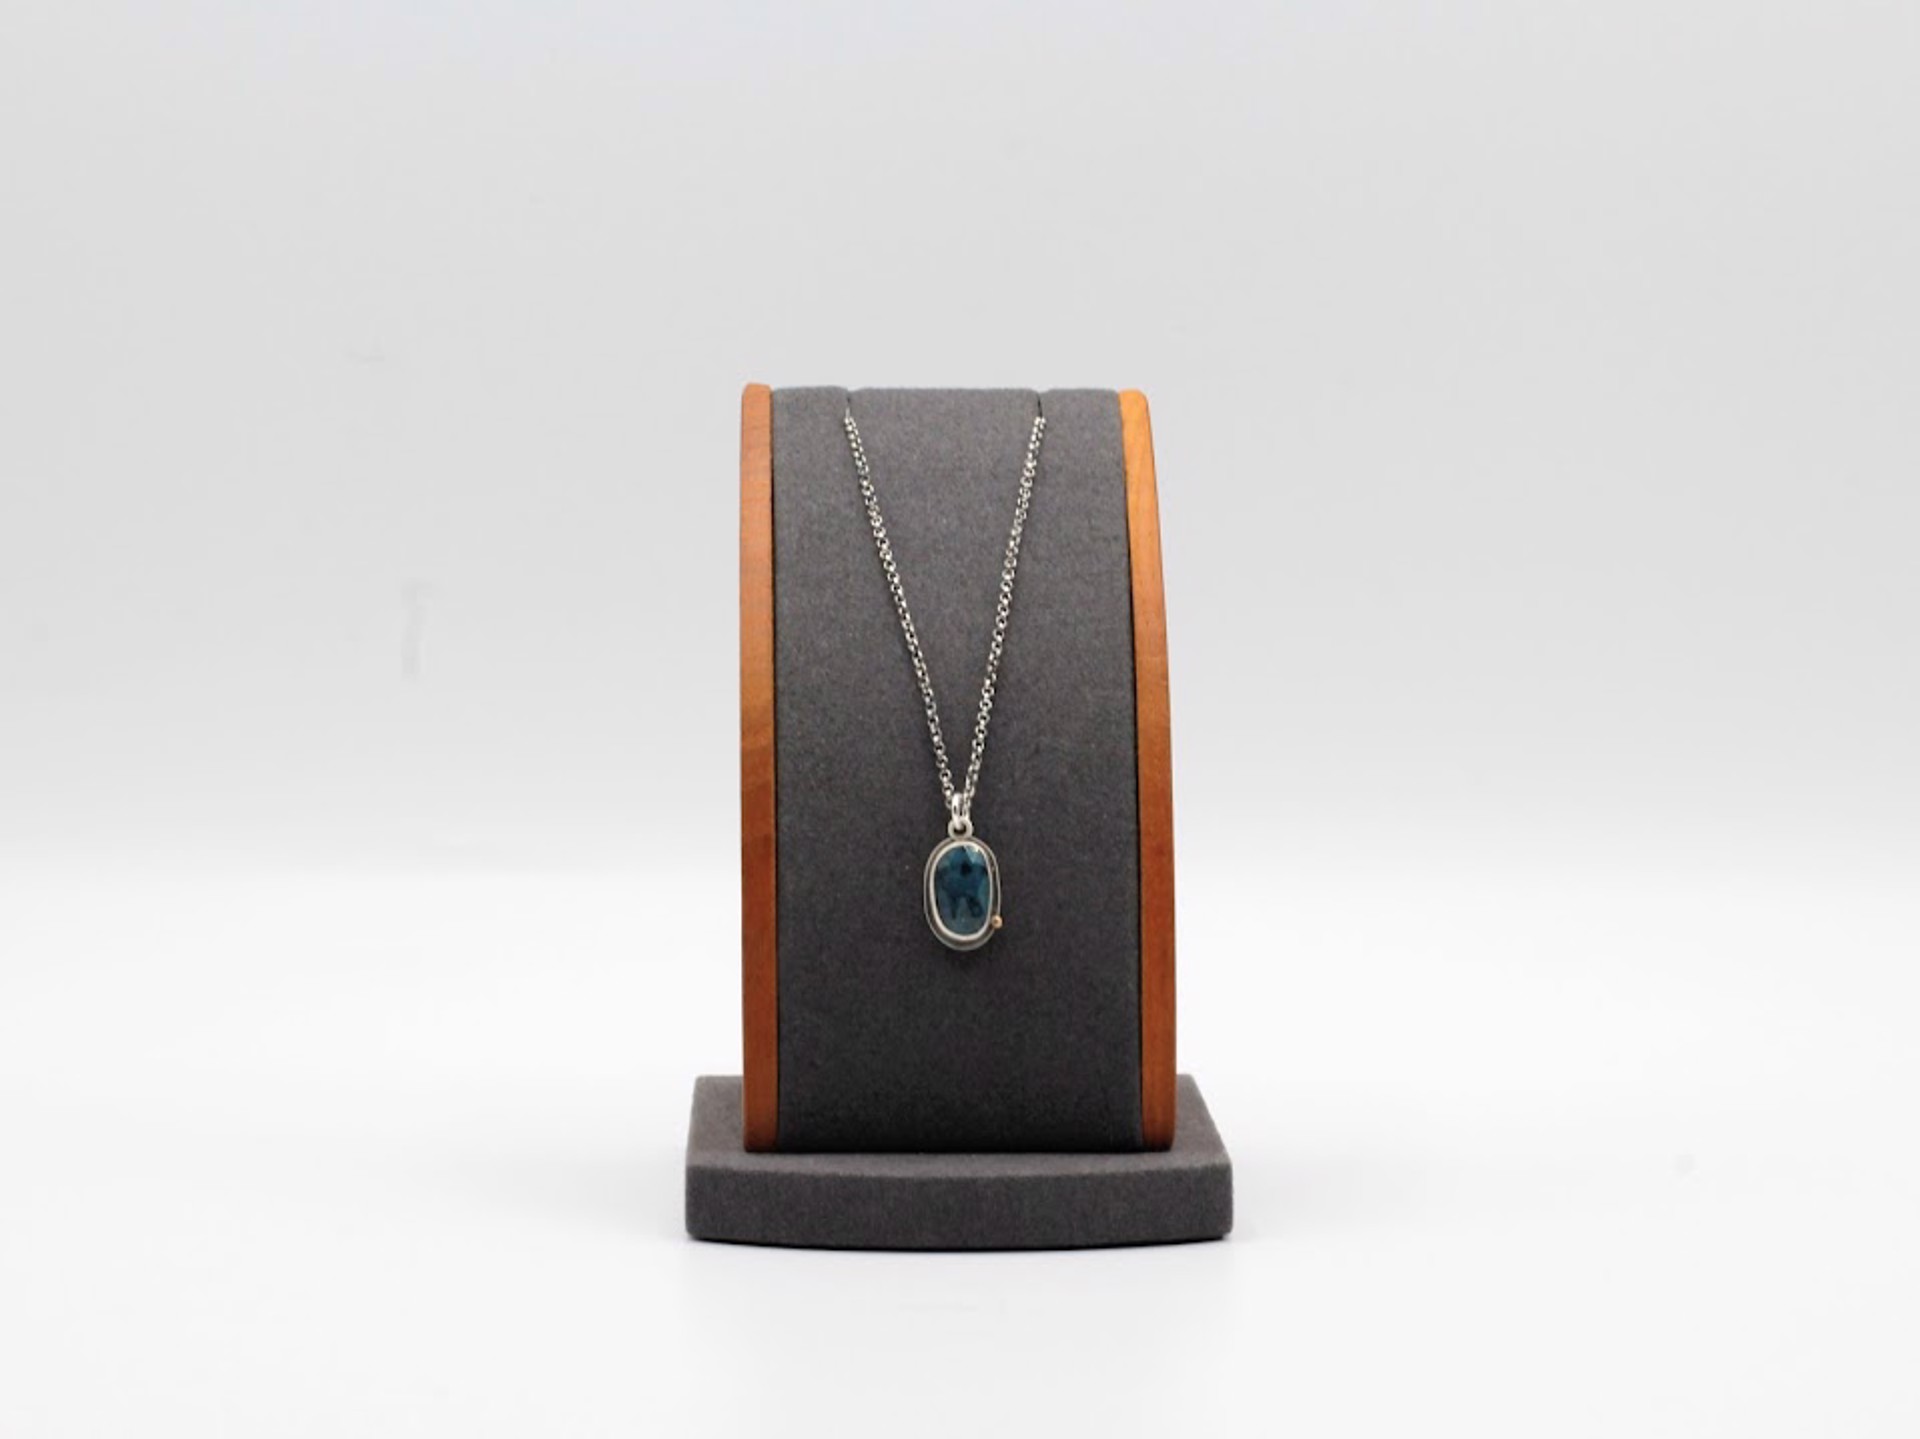 Moss Kyanite Necklace (with 24k gold and sterling) by Kim Knuth